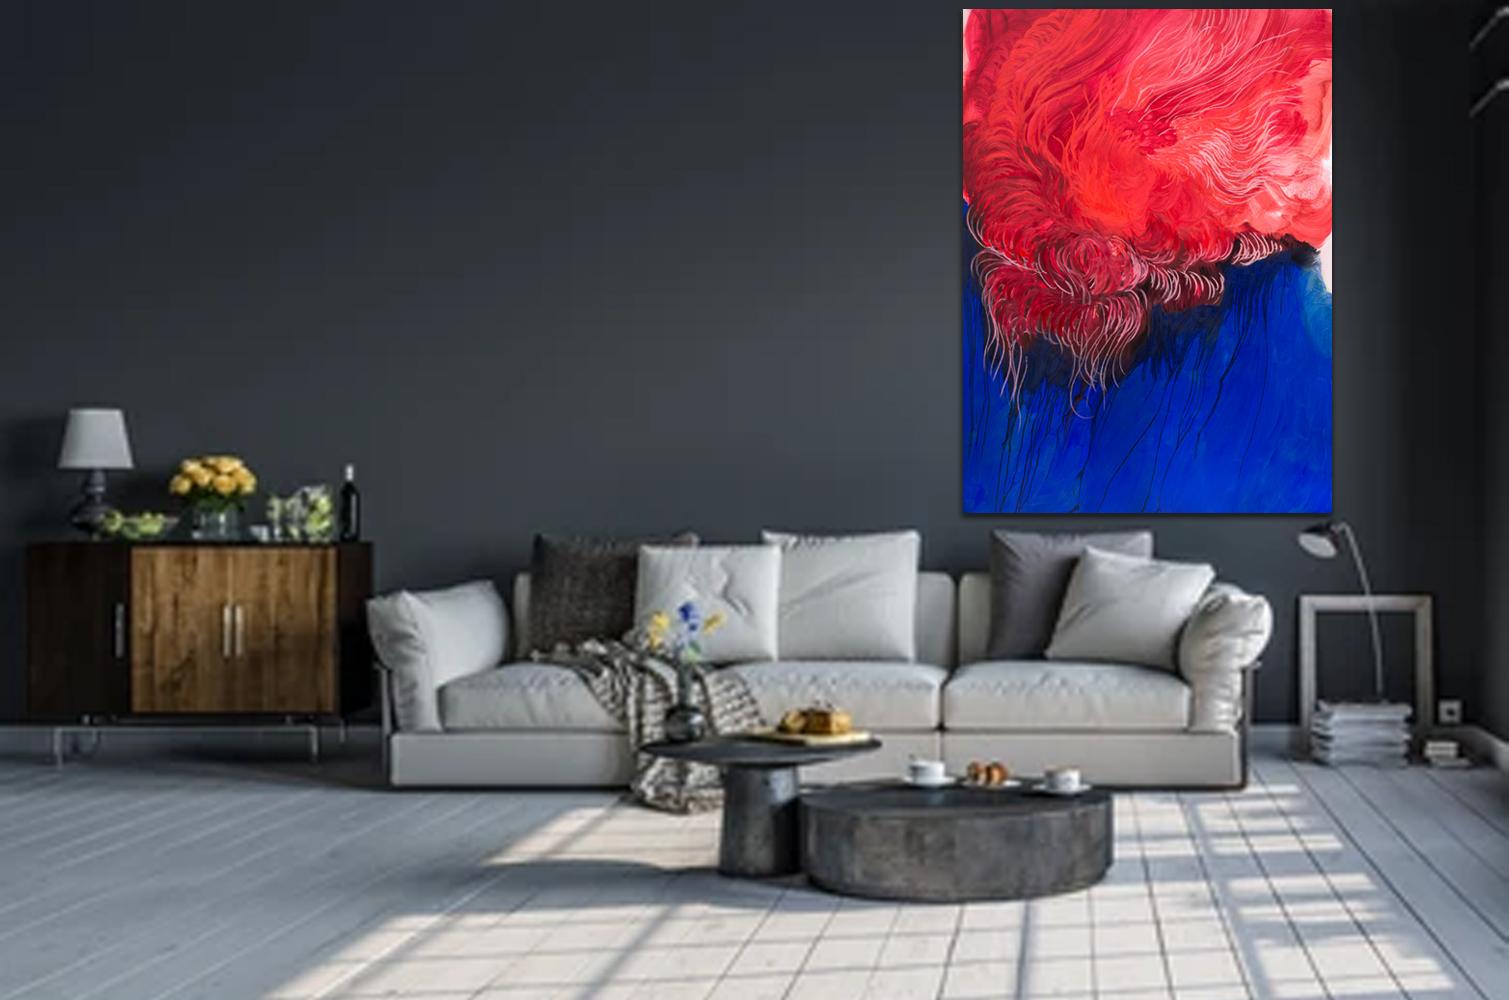  Fervent Love - Modern Expressive Abstract Flowers Oil Painting  - Large Format For Sale 2